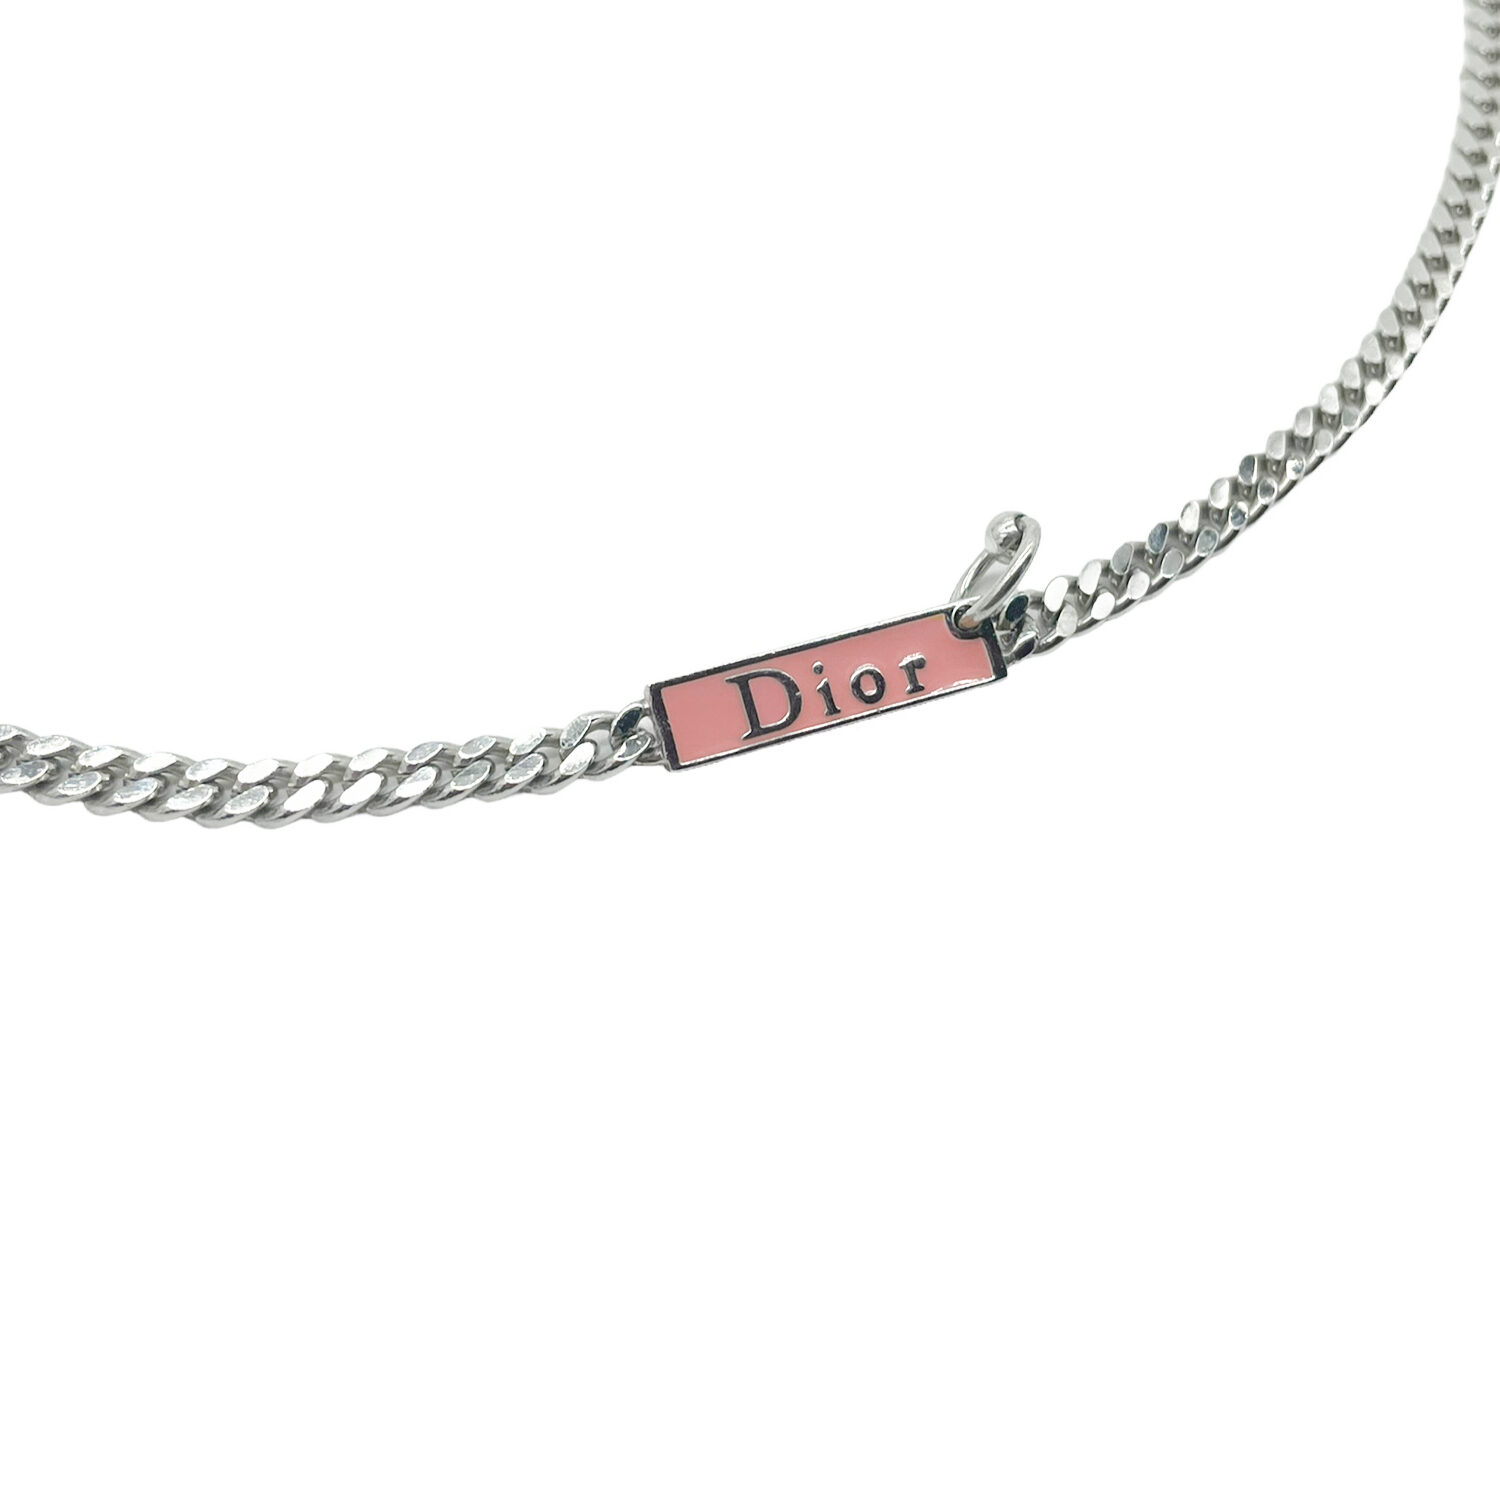 Vintage Dior Piercing Choker Necklace in Baby Pink / Silver | NITRYL